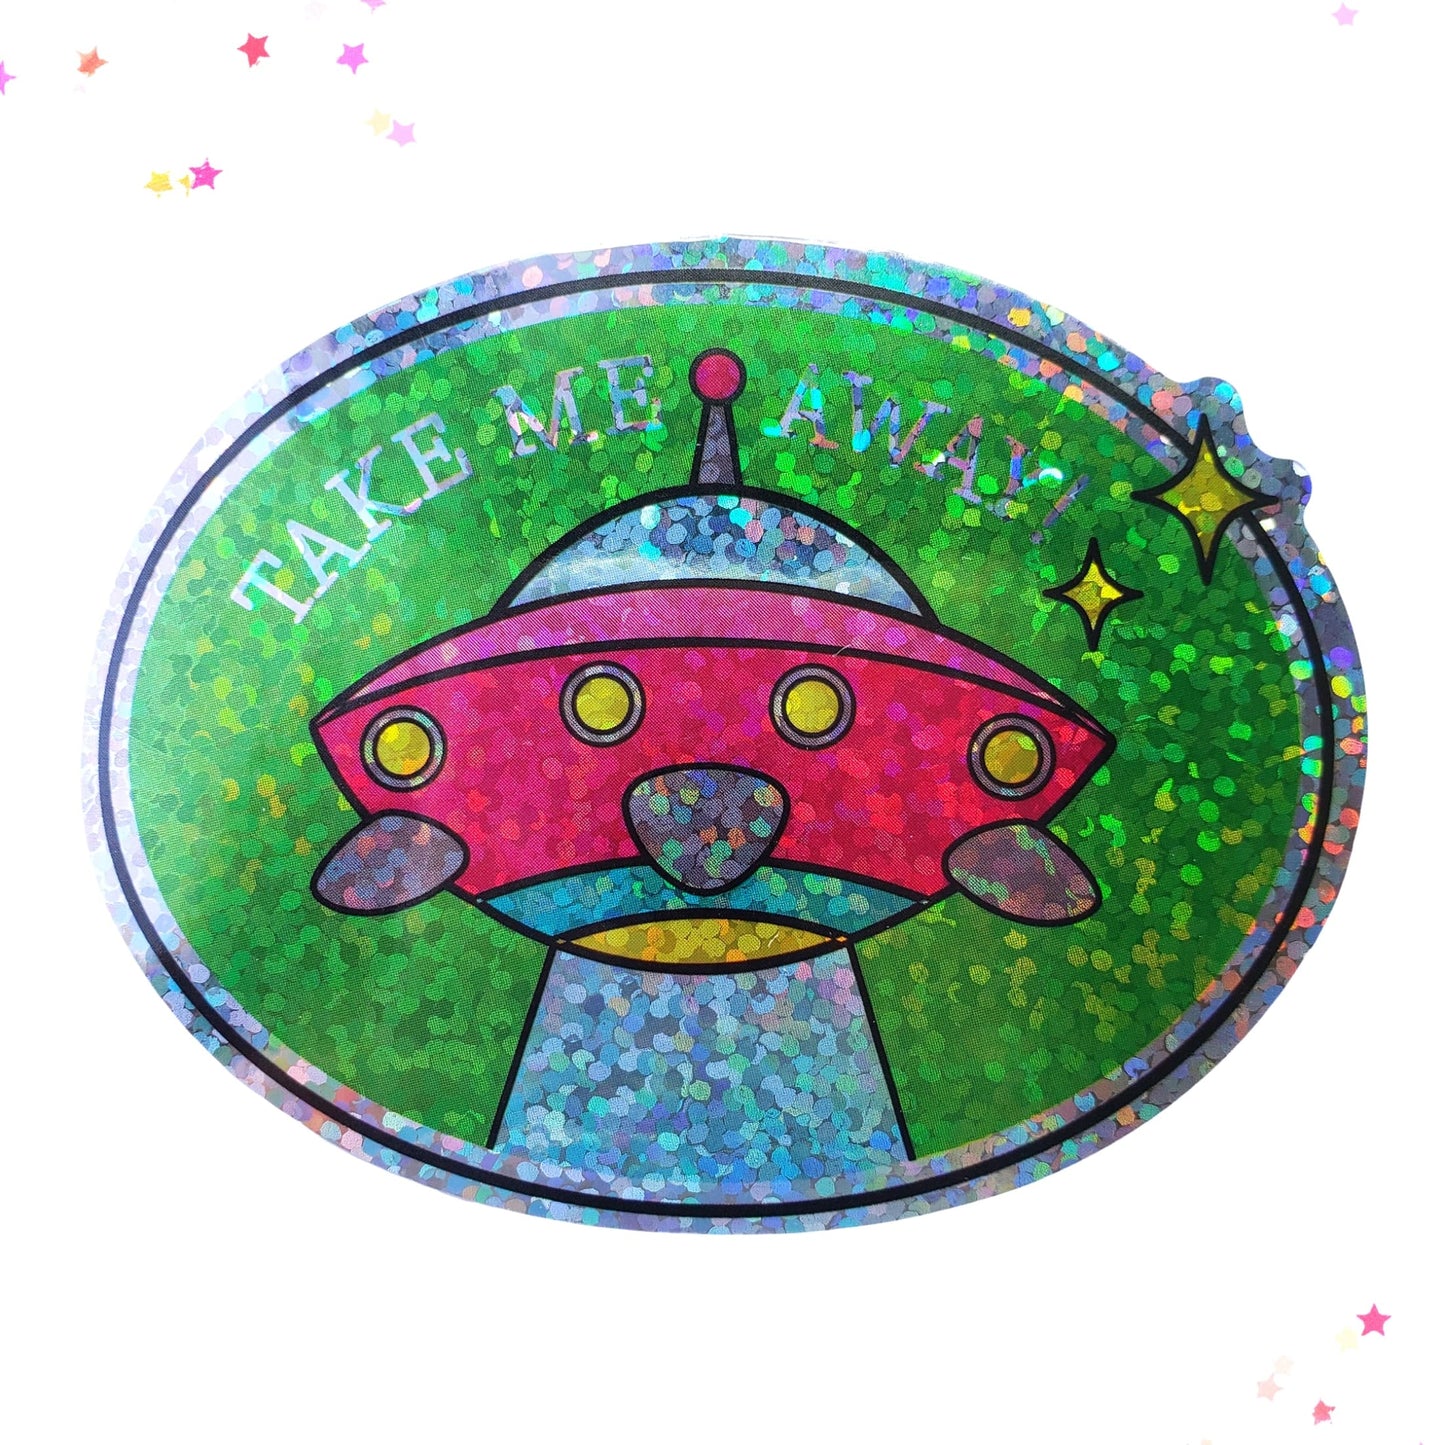 Premium Sticker - Sparkly Holographic Glitter Spaceship Take Me Away from Confetti Kitty, Only 2.0